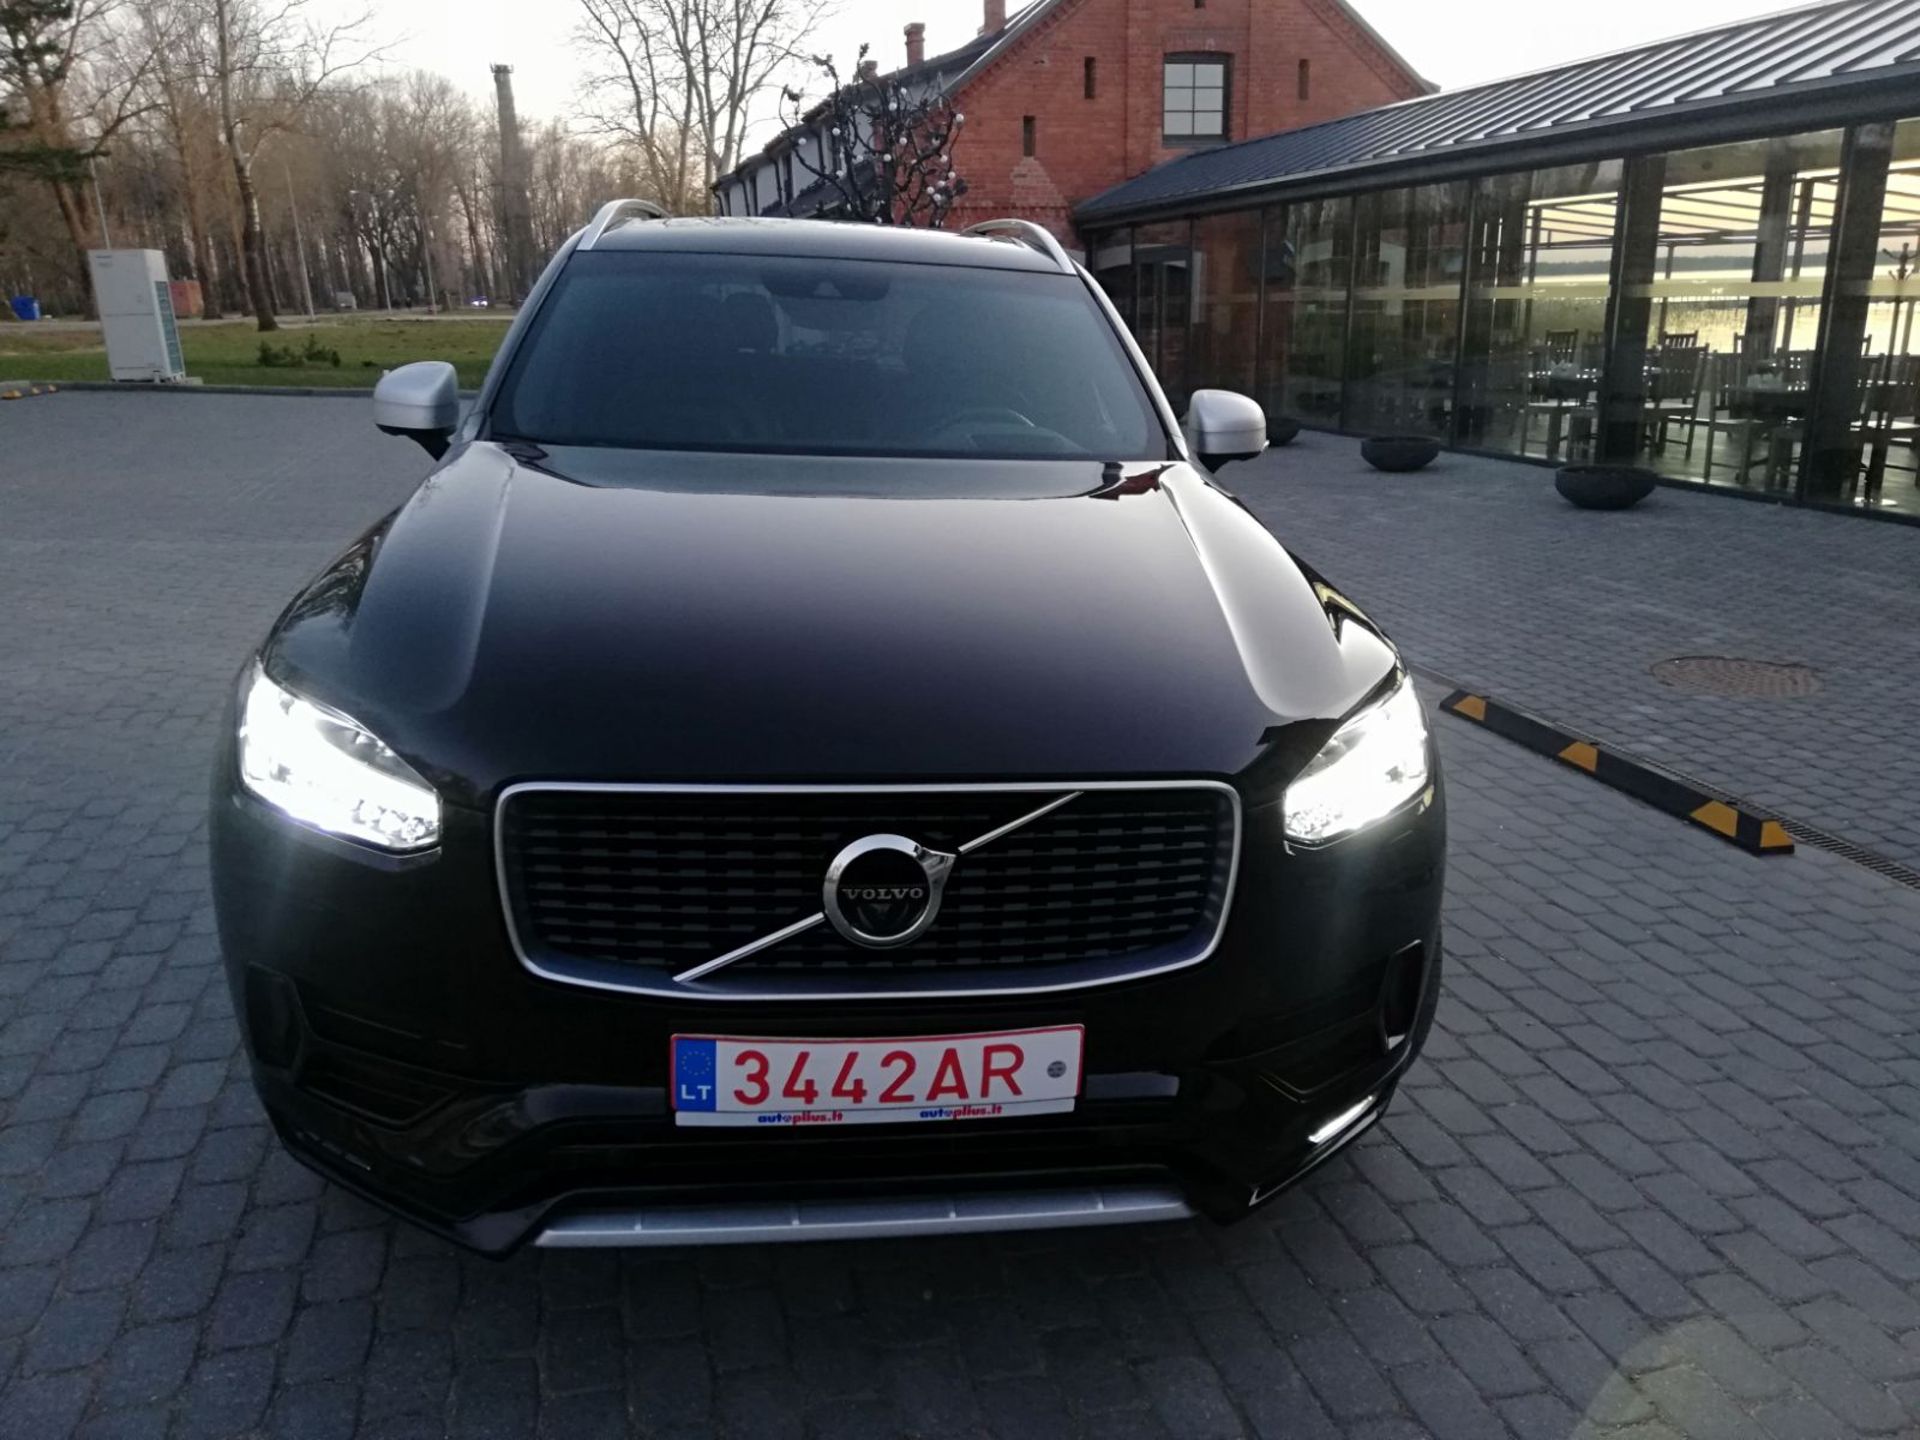 2017 VOLVO XC90 T6 AWD LEFT HAND DRIVE R-DESIGN 2.0L PETROL AUTOMATIC, 45,000 KM, DRIVES LIKE NEW - Image 3 of 20